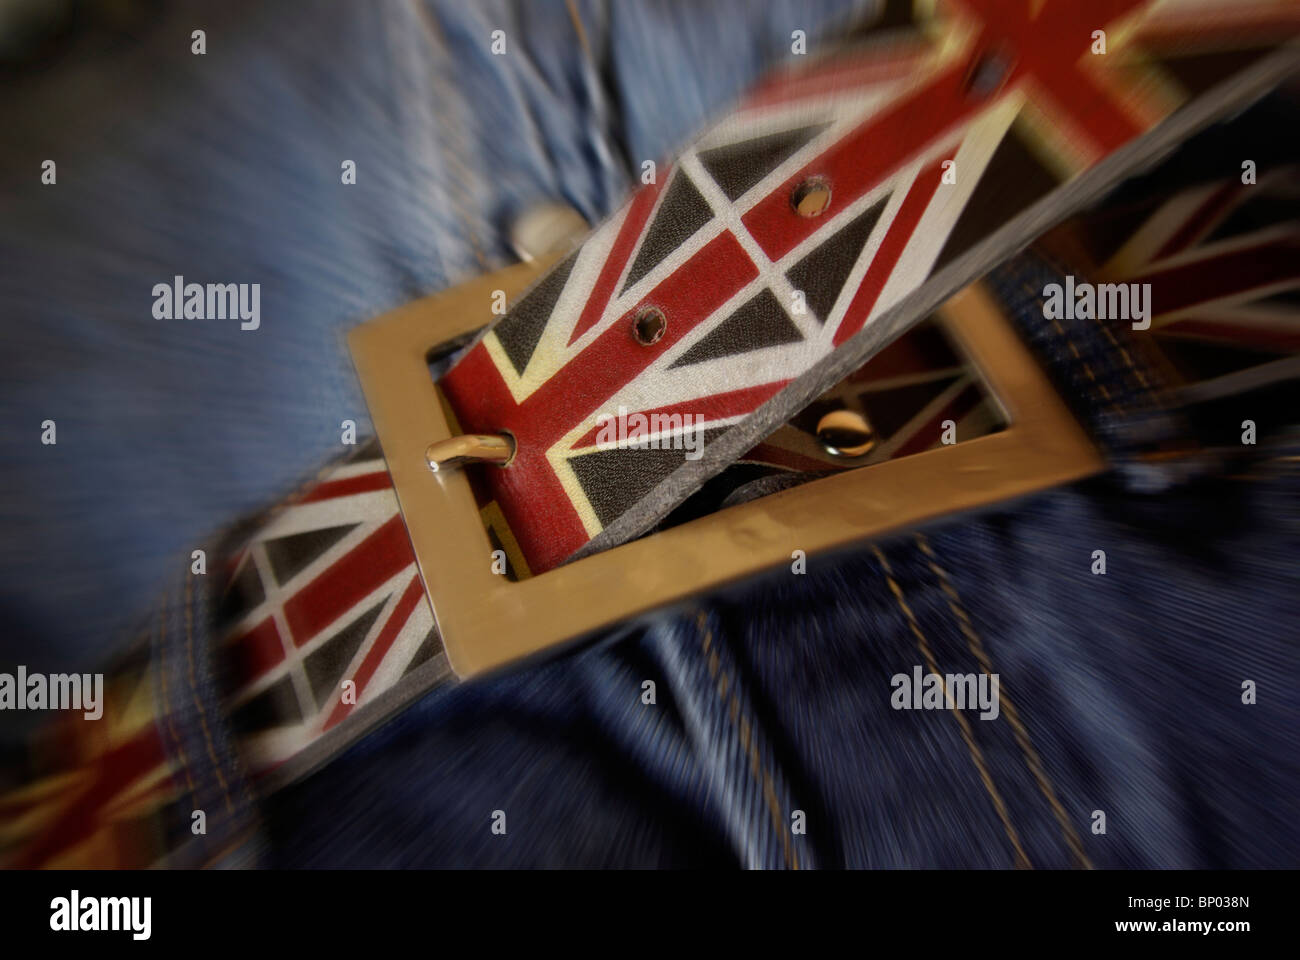 Tighten your belt, Tightening your belt concept featuring the (Union Jack) UK flag design on belt being tightened,cutting costs, Stock Photo